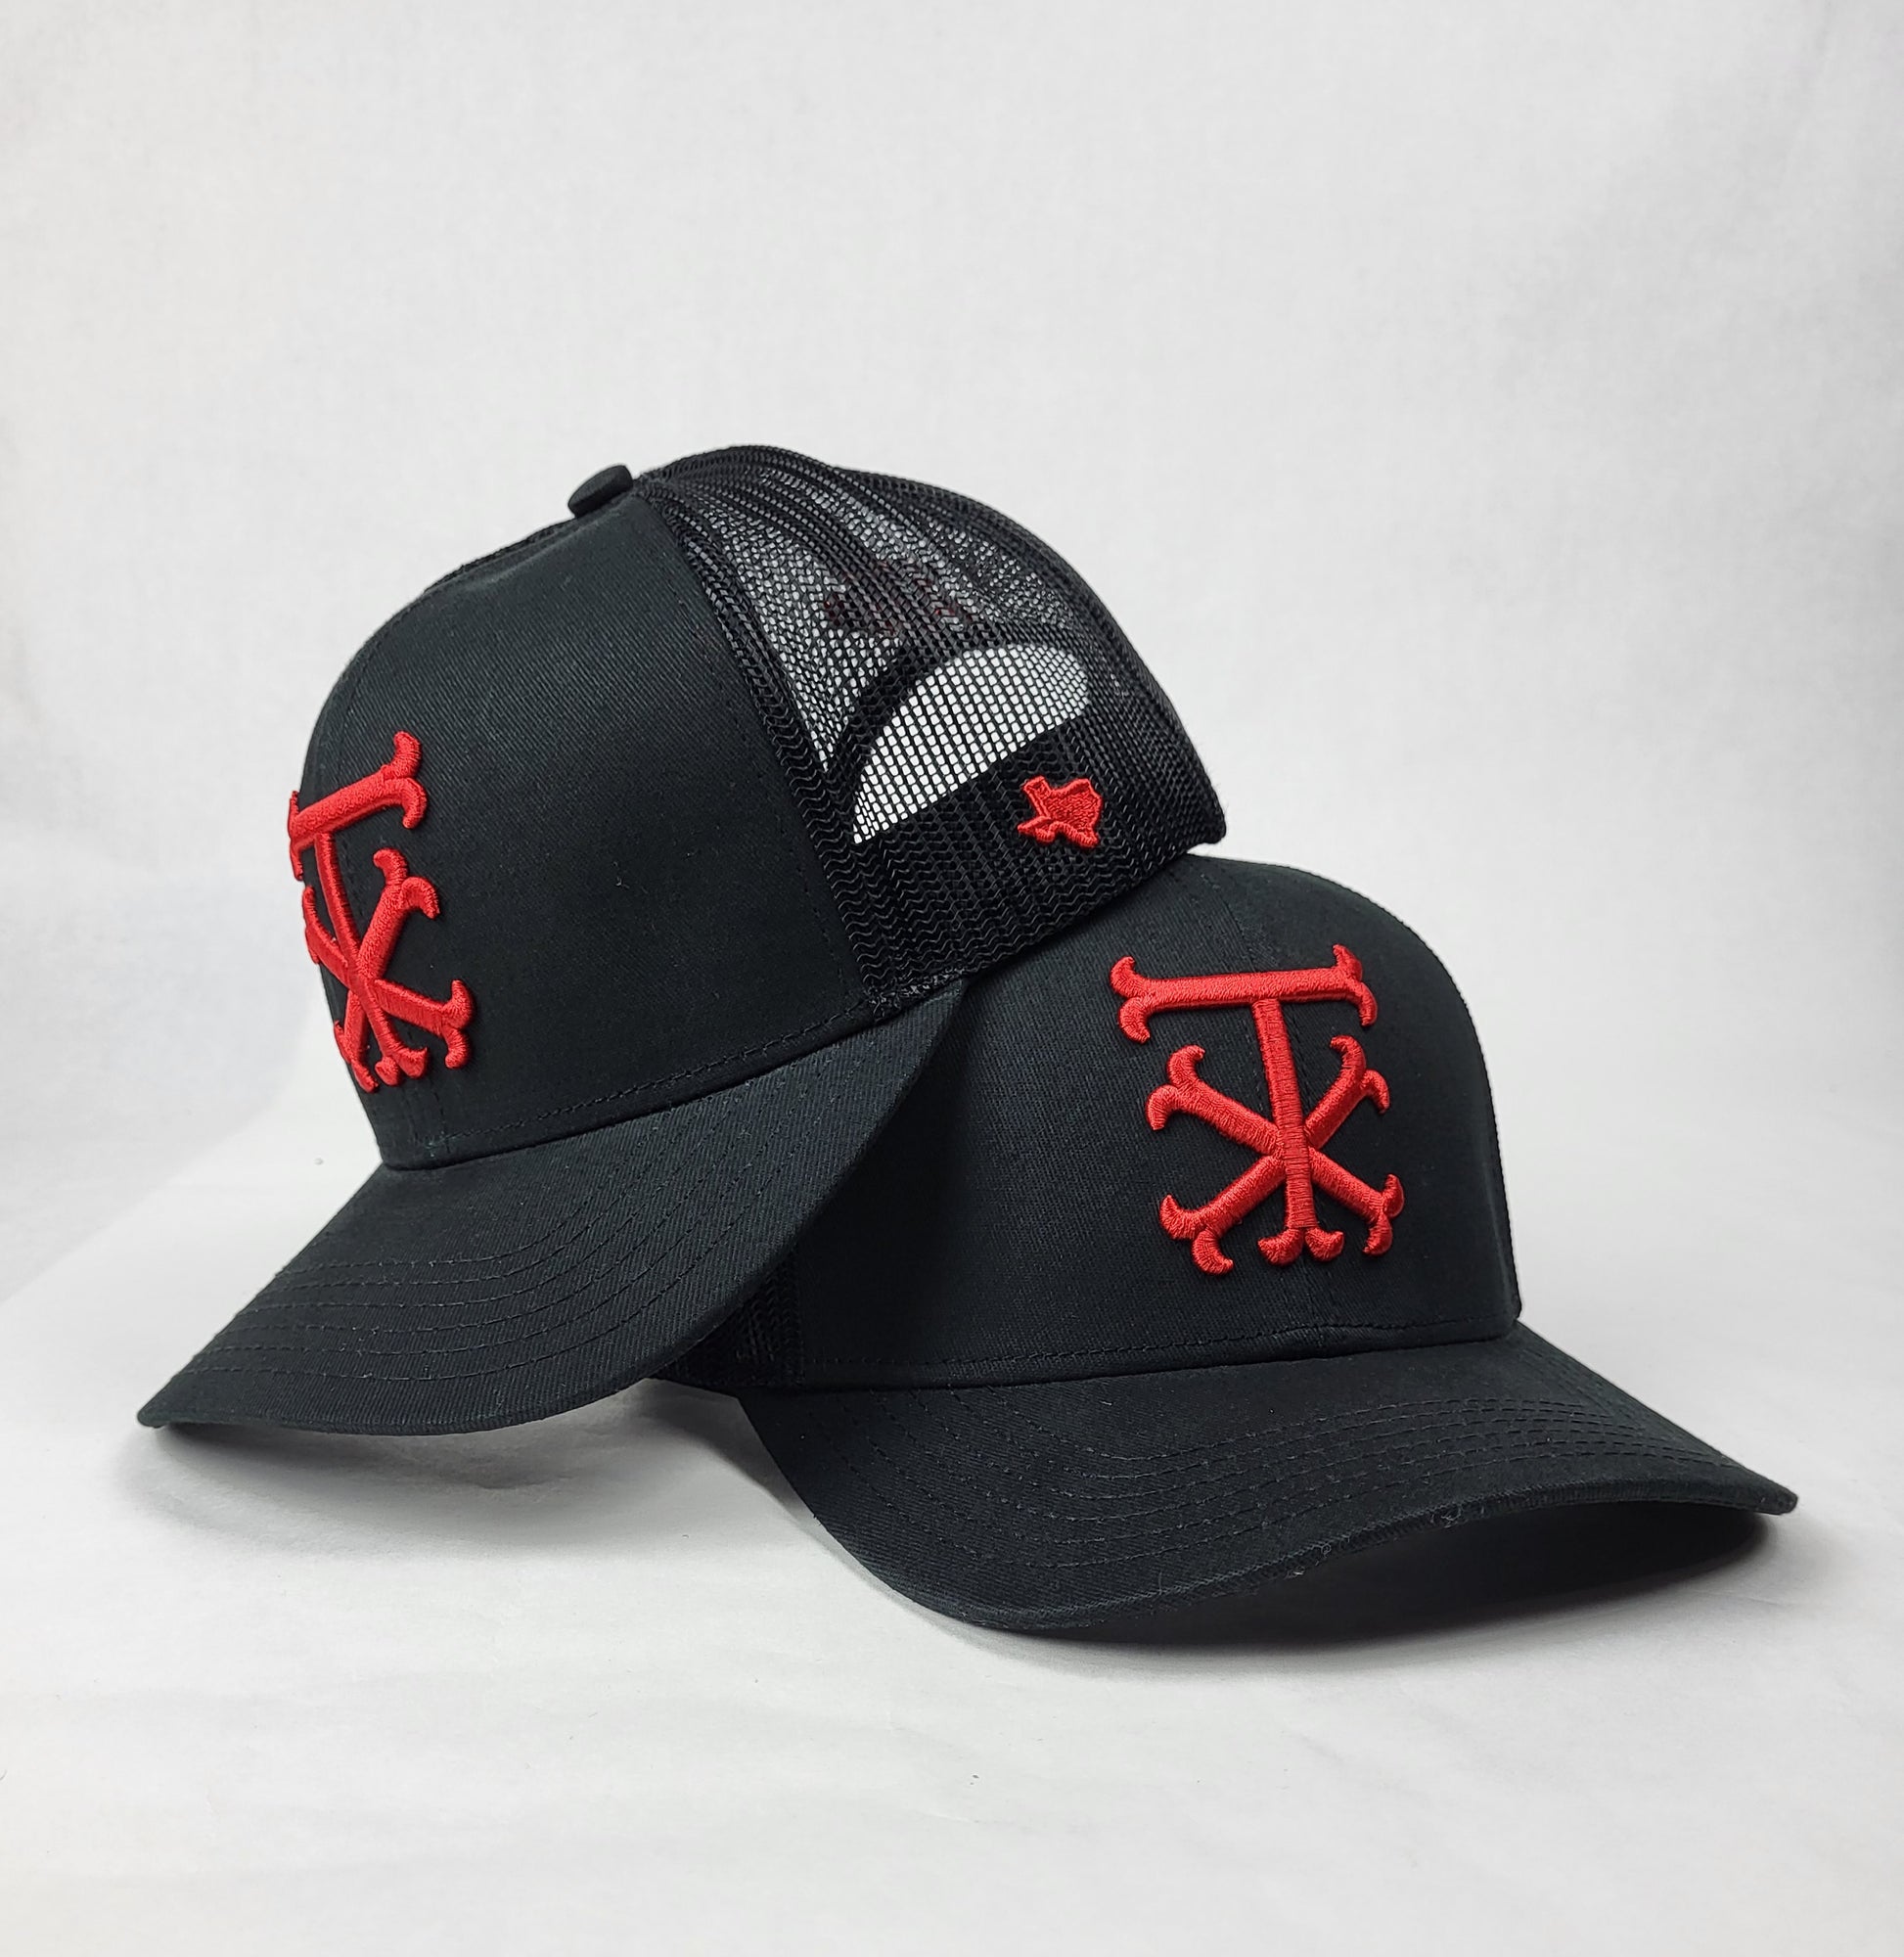 Txers, Txers Gear, black and red, Texas hat, TX hat, Texas, New era, Snapback, trucker hat, Texas hat, Snapback hat, Facebook, Purchase, Add to cart, 59fifty